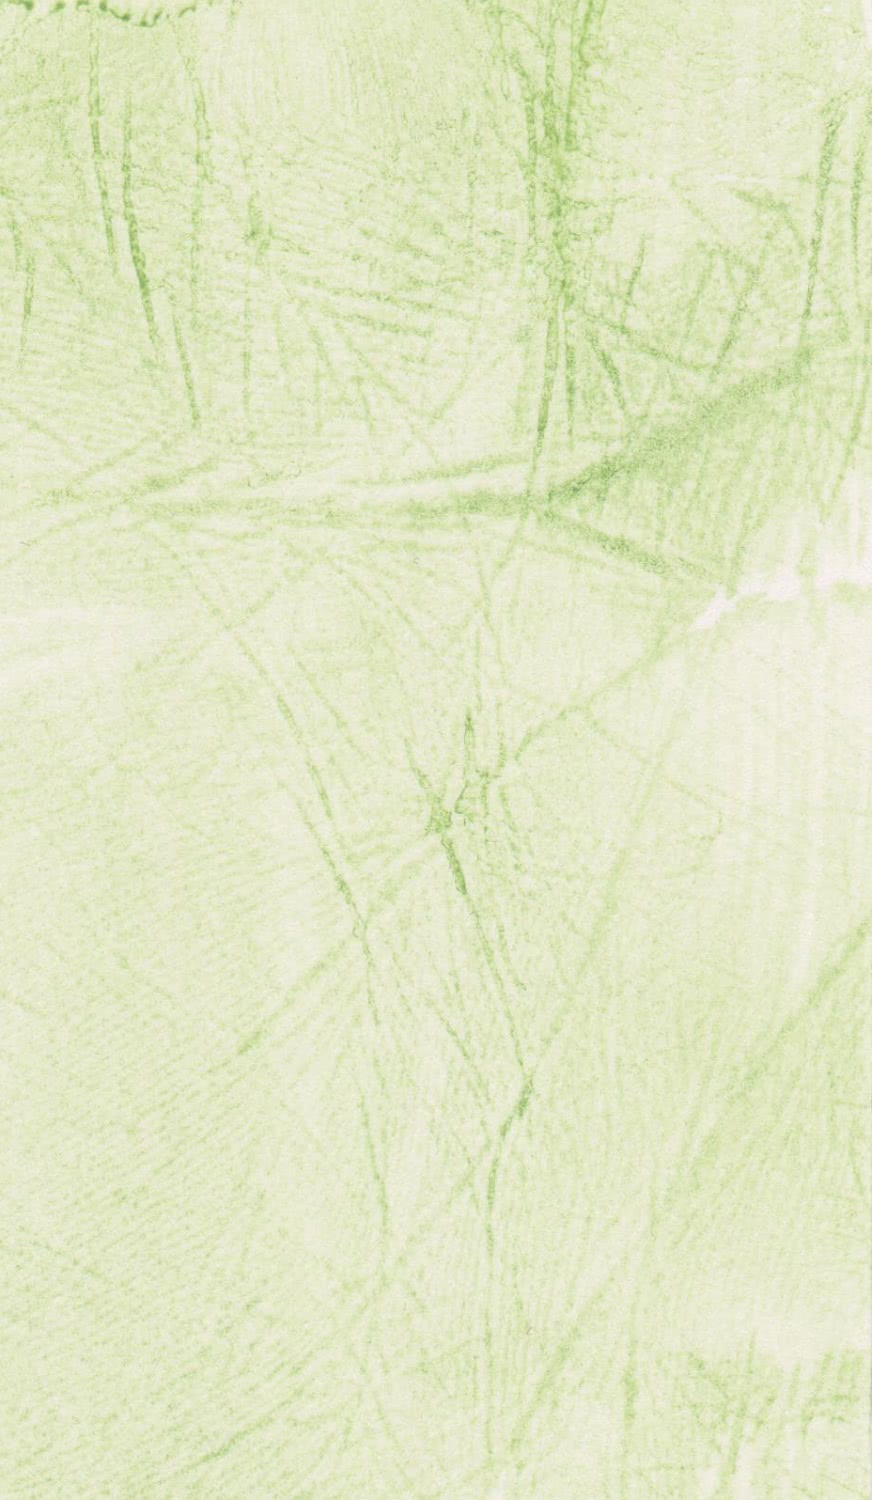 Part of a hand print close up, Green